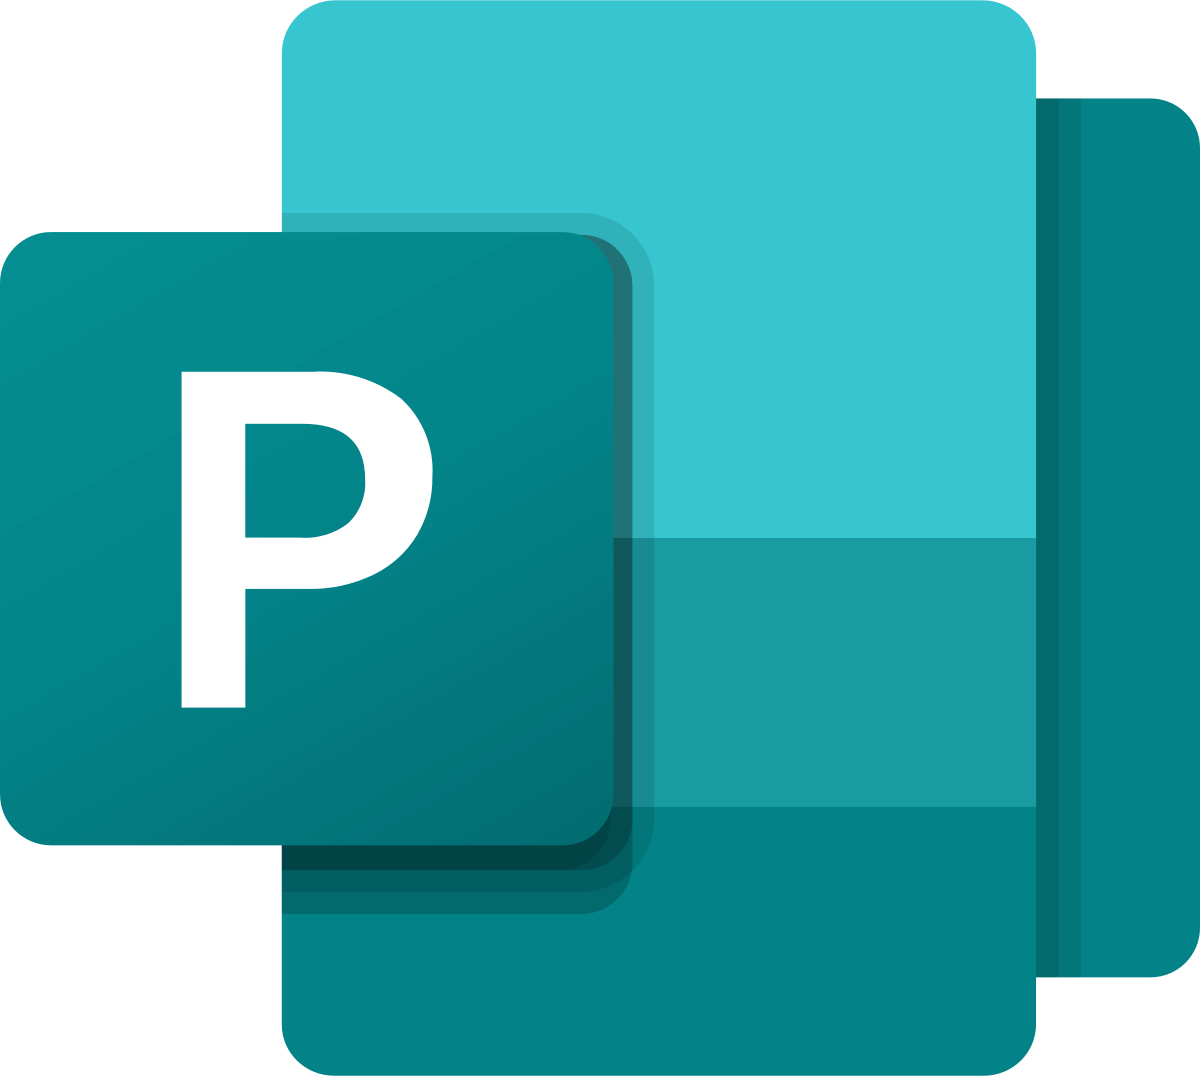 microsoft publisher 2013 online free download